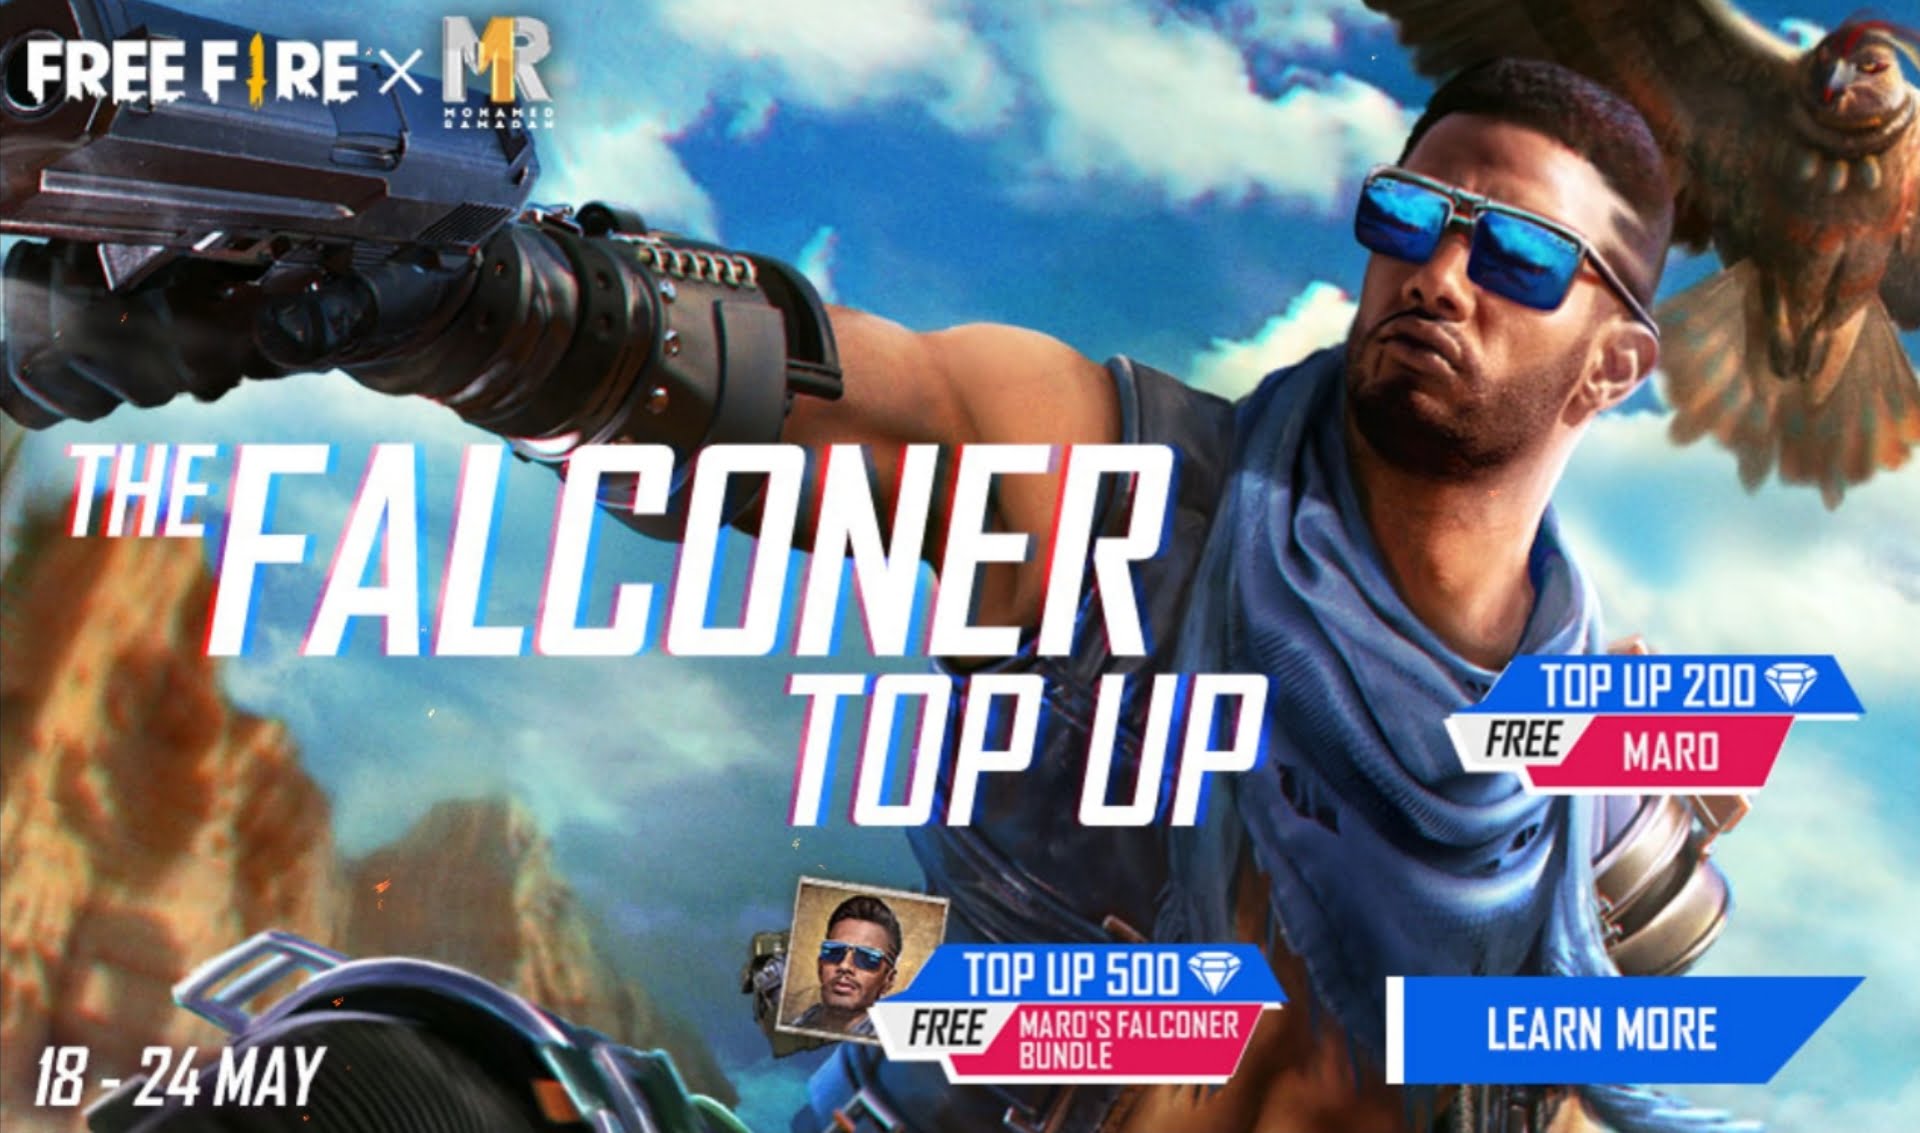 The Falconer Top Up Event